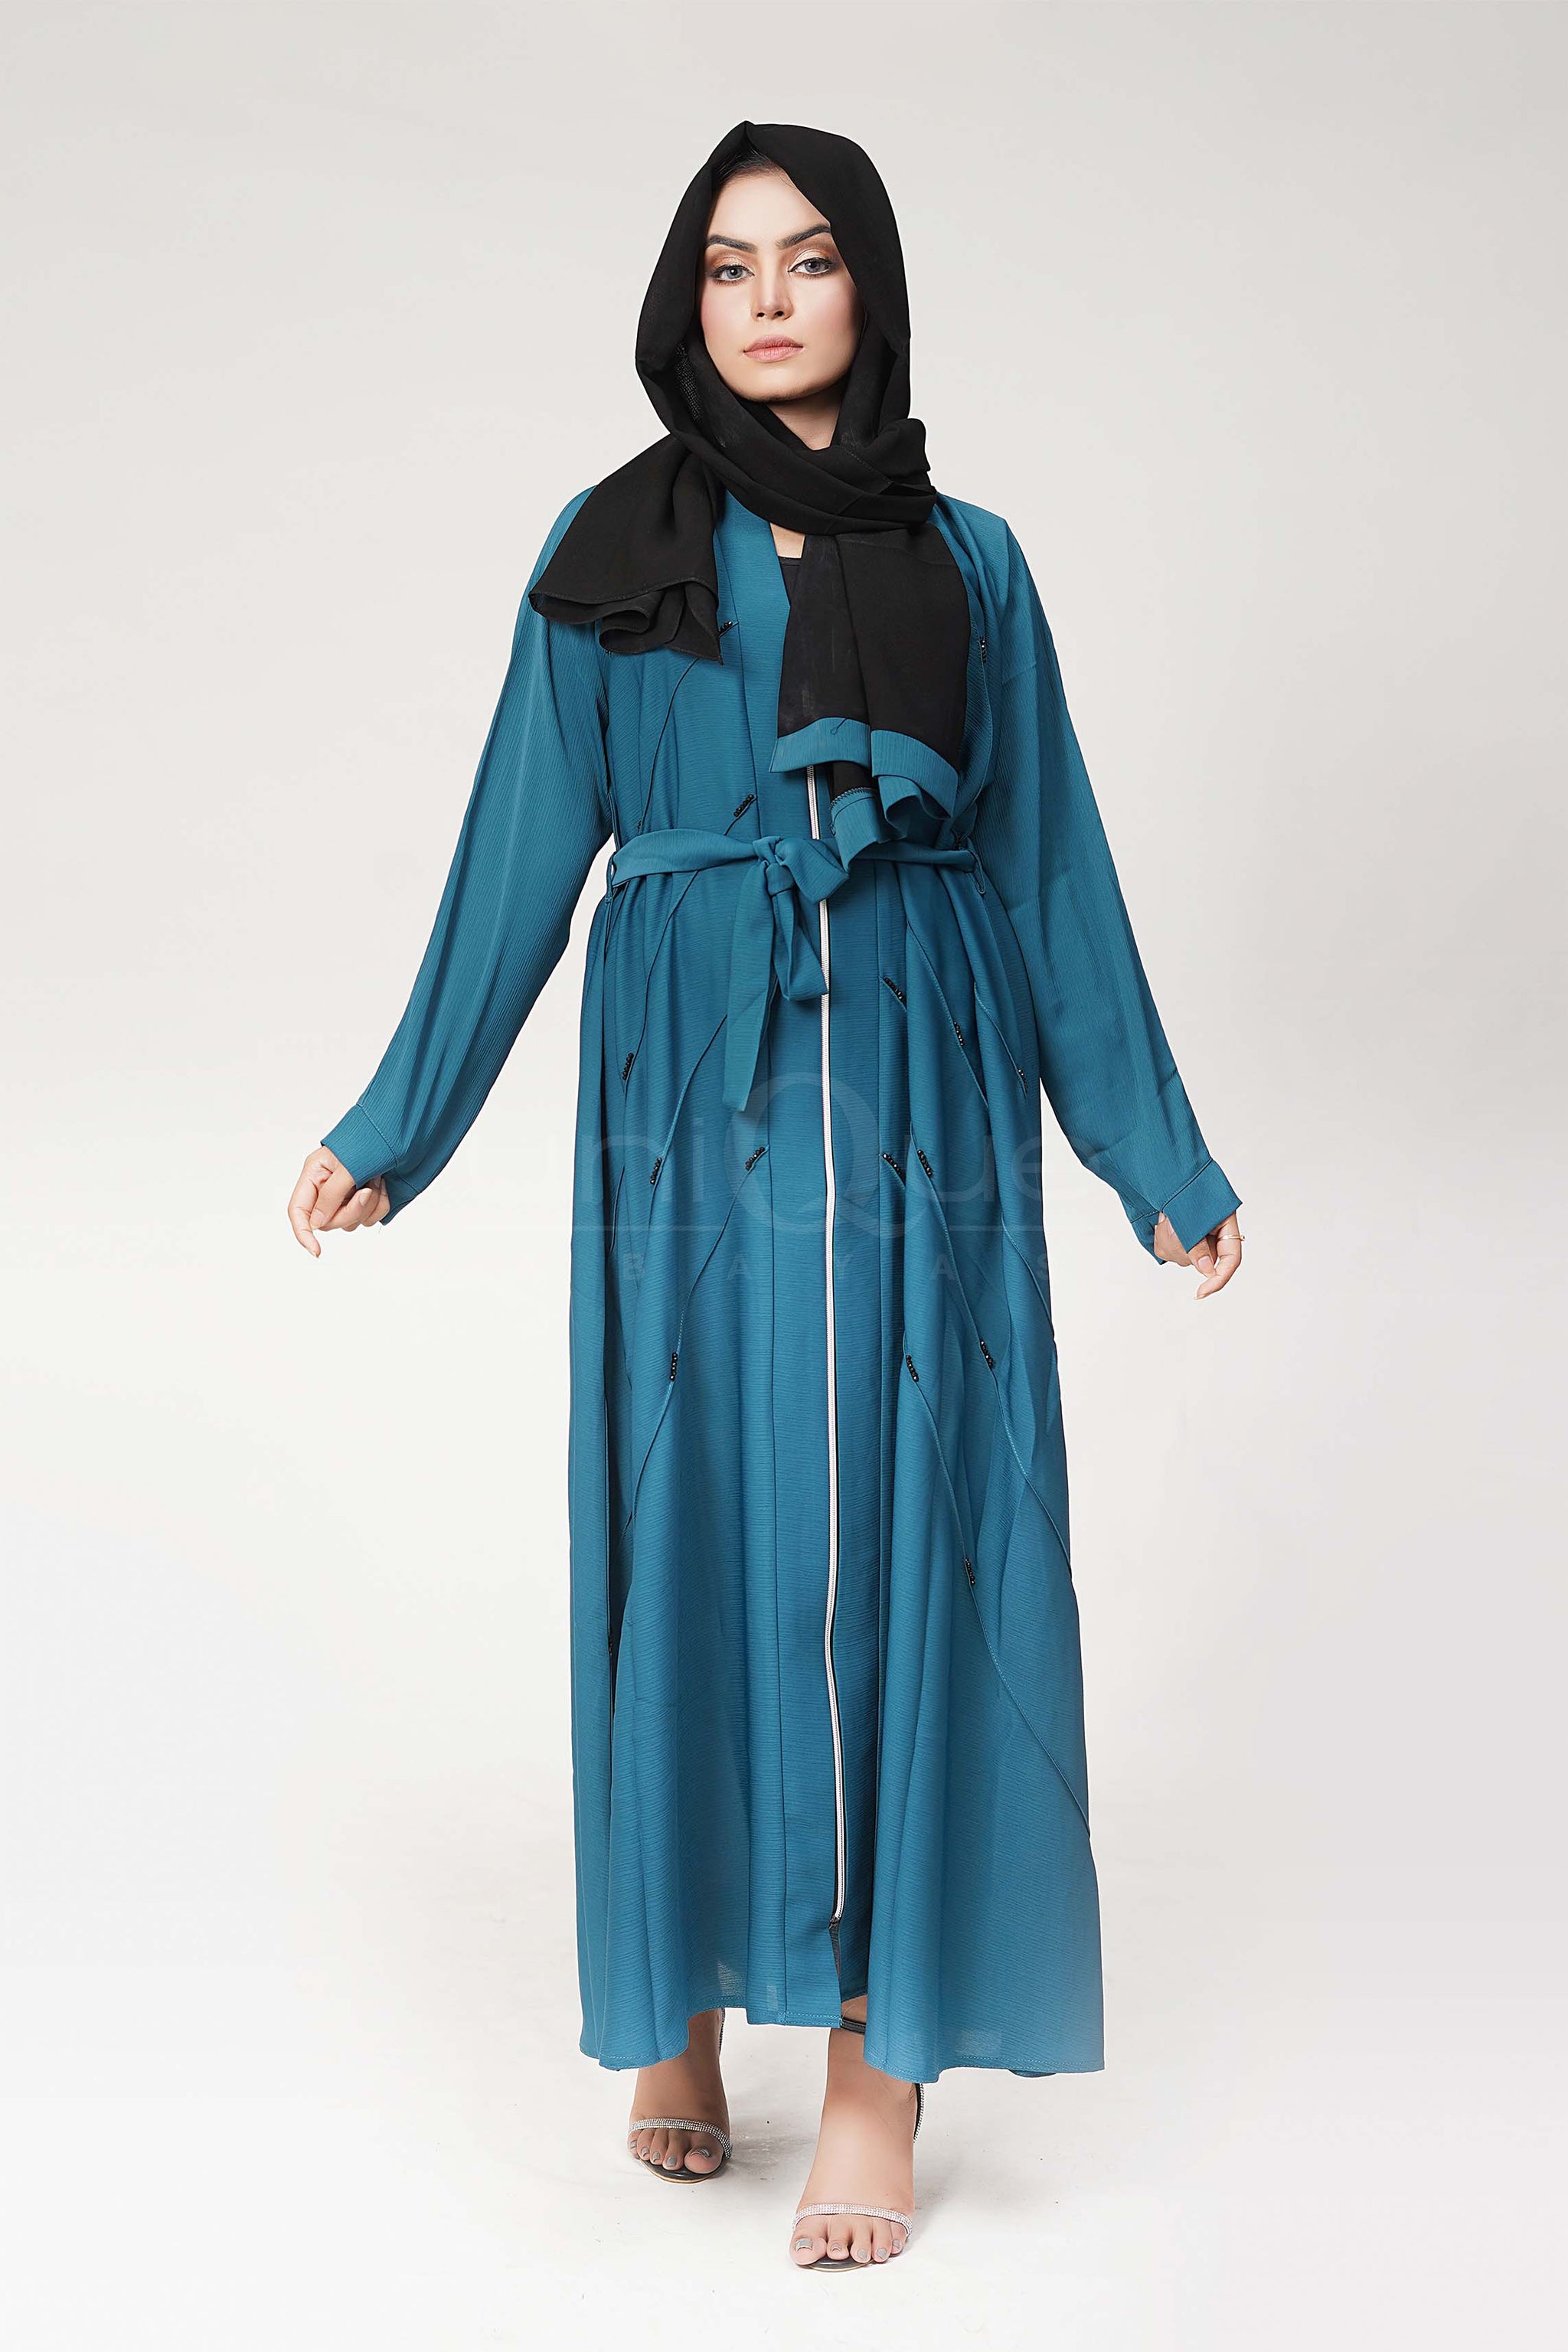 Full Zip Embellished Turquoise Abaya by Uniquewallart Abaya for Women, Front Side View